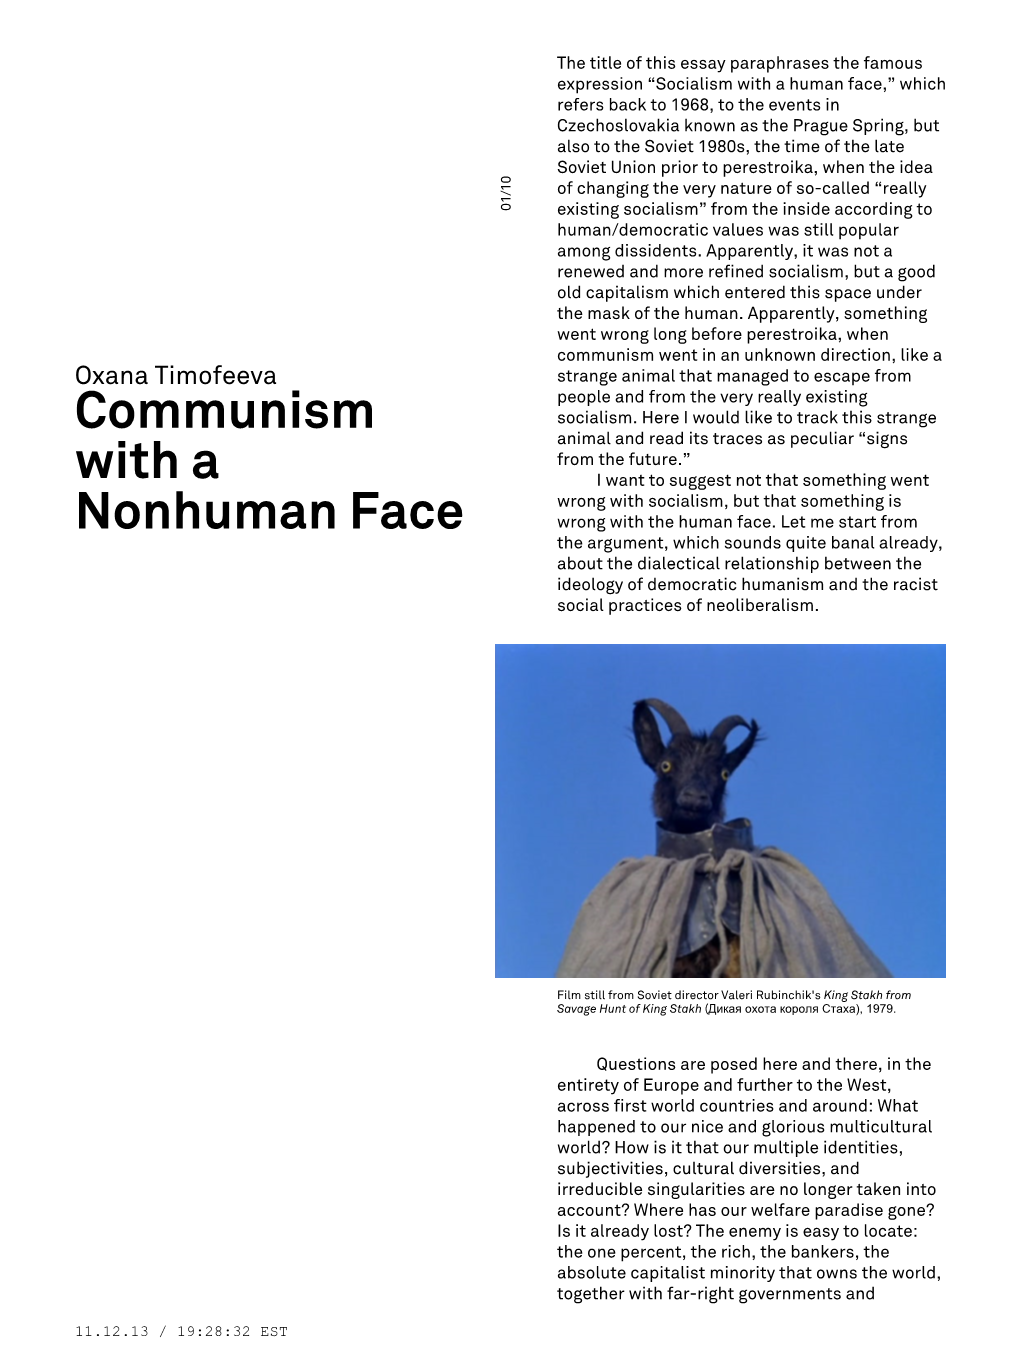 Communism with a Nonhuman Face